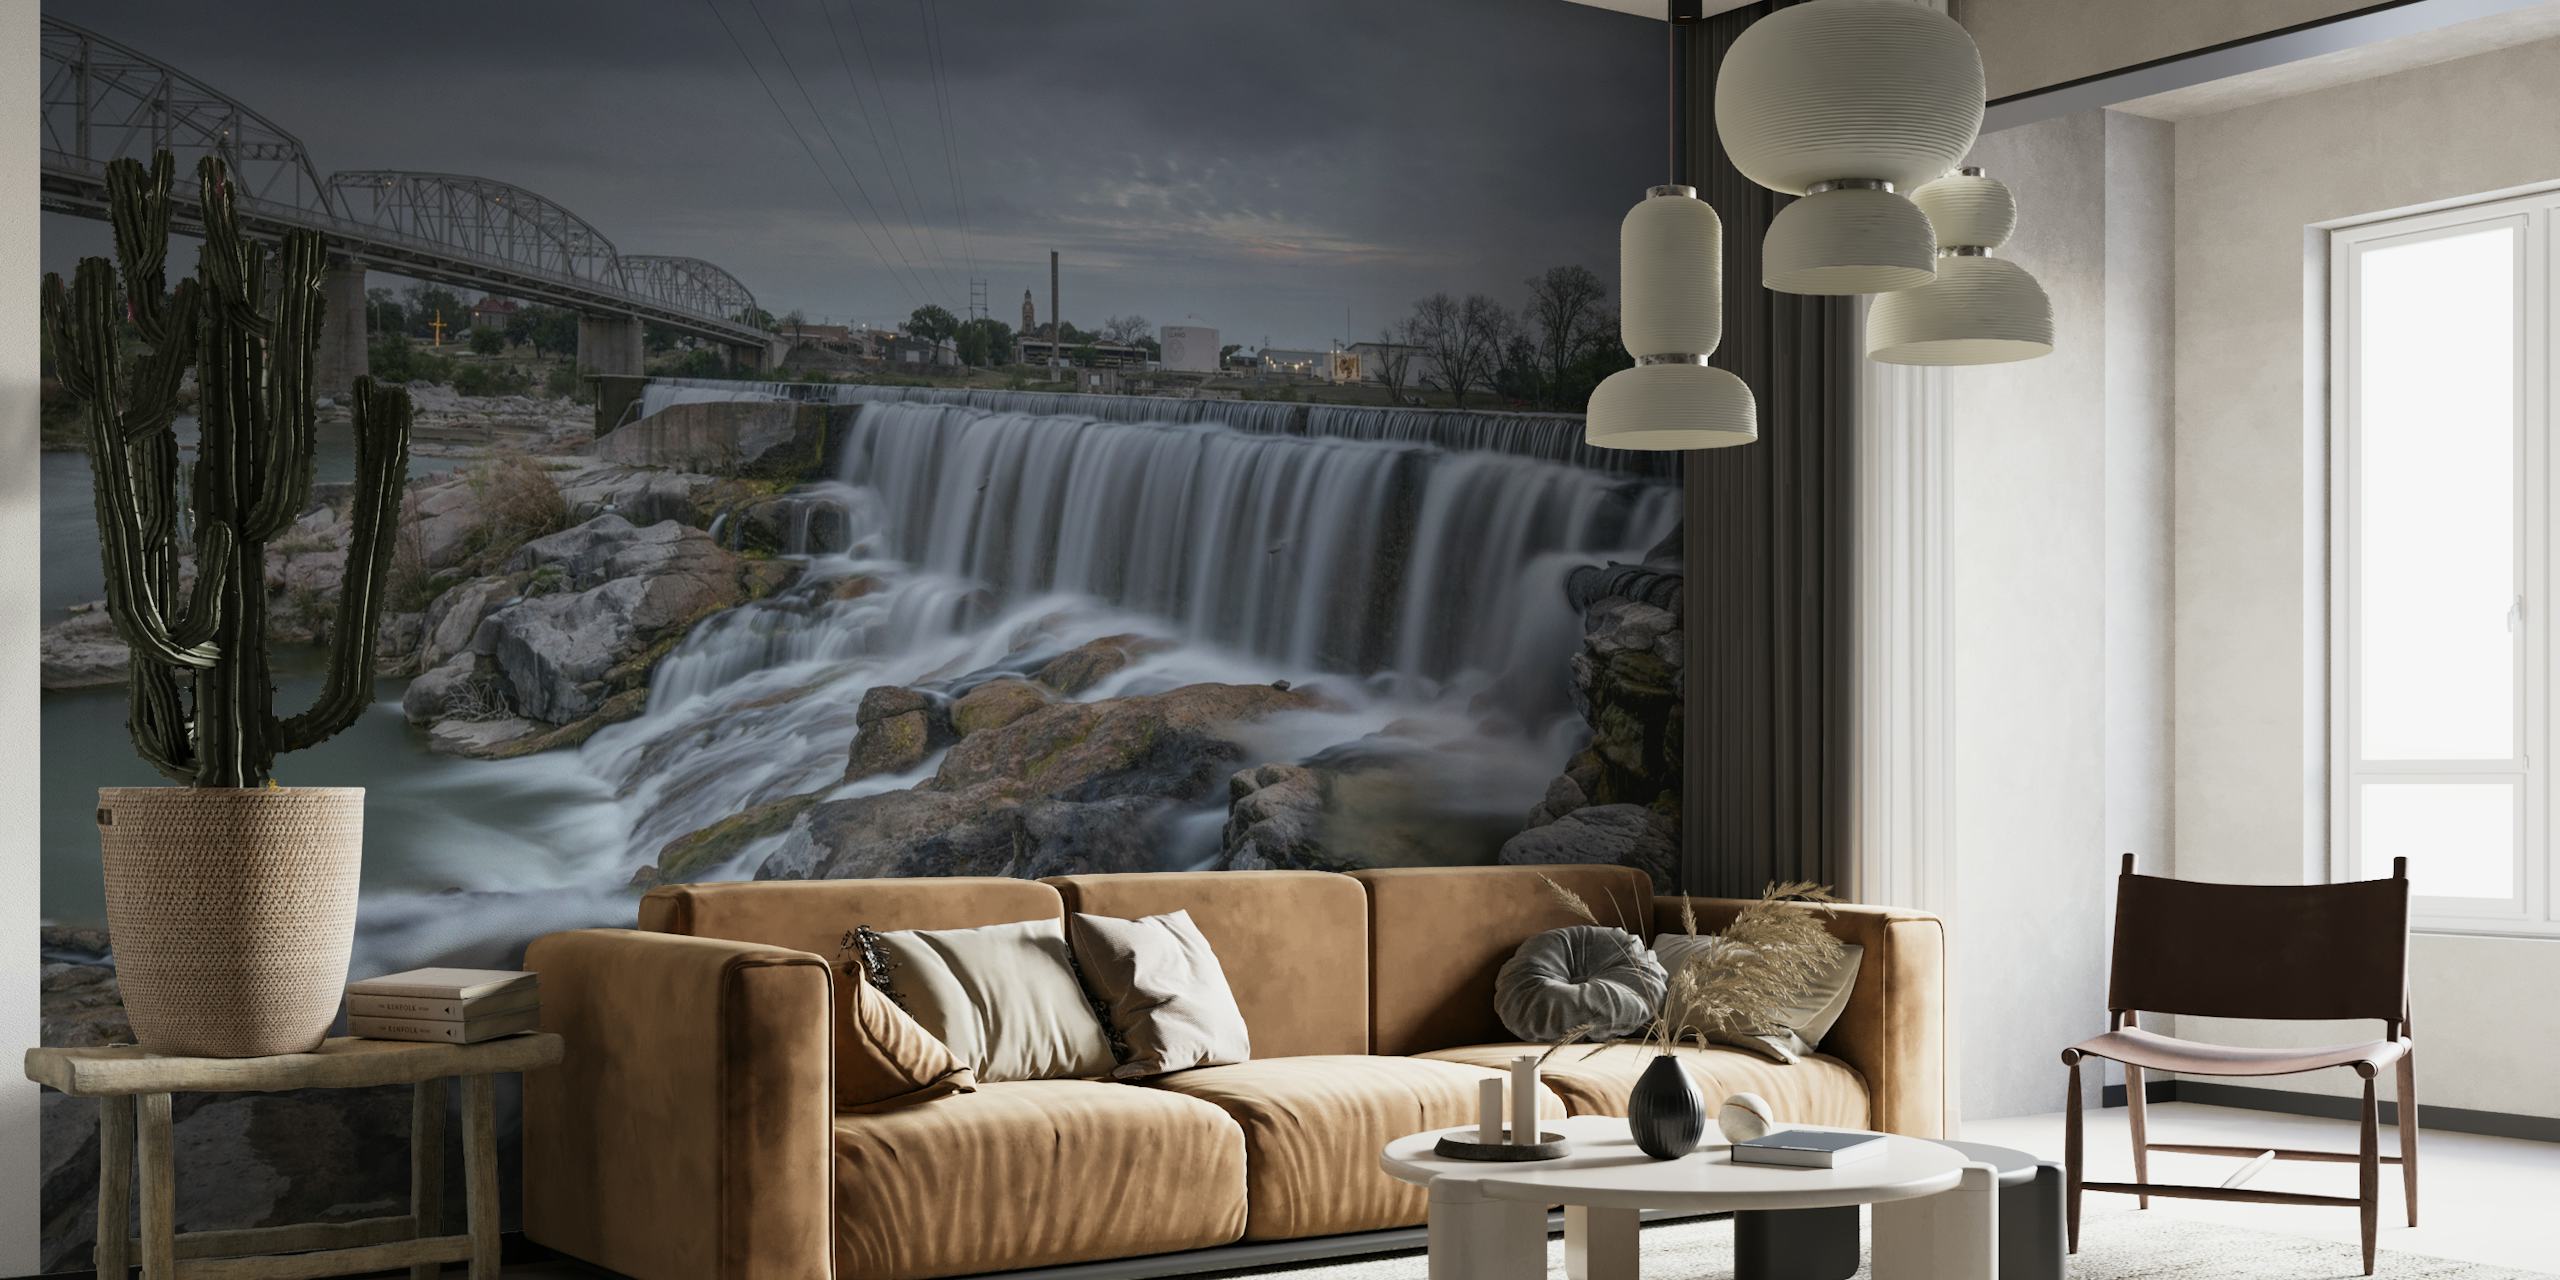 Llano Spillway Texas wall mural featuring a waterfall with rocks and cloudy skies